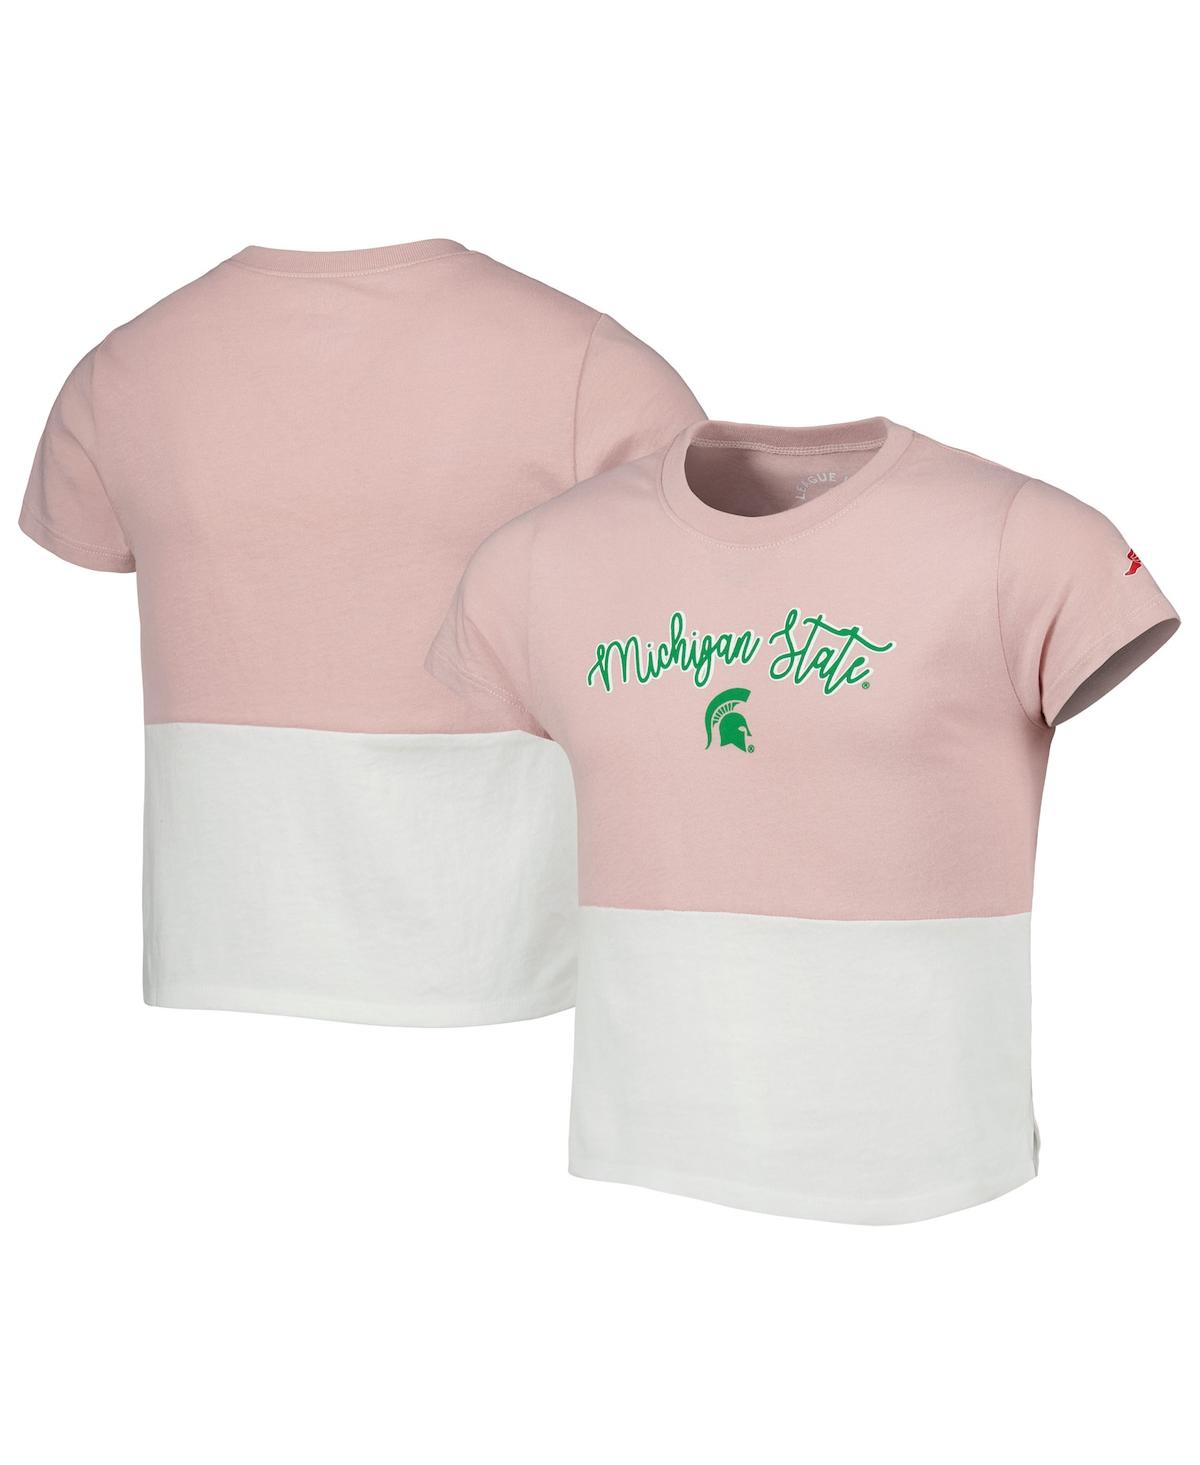 LEAGUE COLLEGIATE WEAR GIRLS YOUTH LEAGUE COLLEGIATE WEAR PINK, WHITE MICHIGAN STATE SPARTANS COLORBLOCKED T-SHIRT